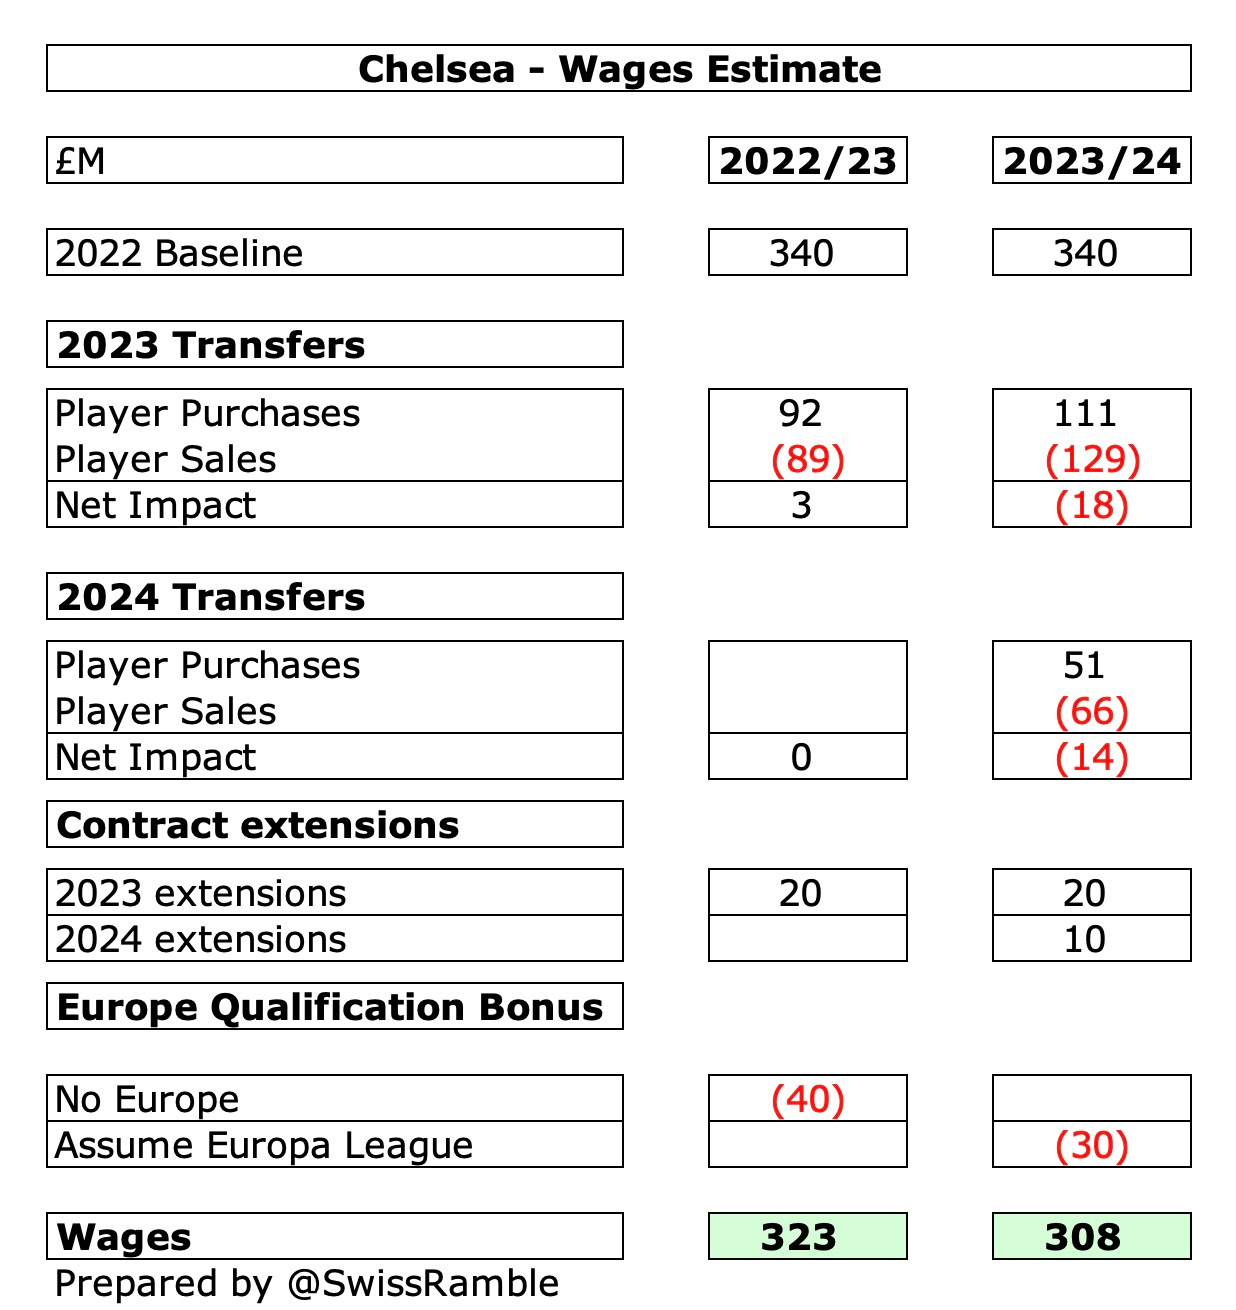 How Can Chelsea Comply with FFP rules? - The Swiss Ramble